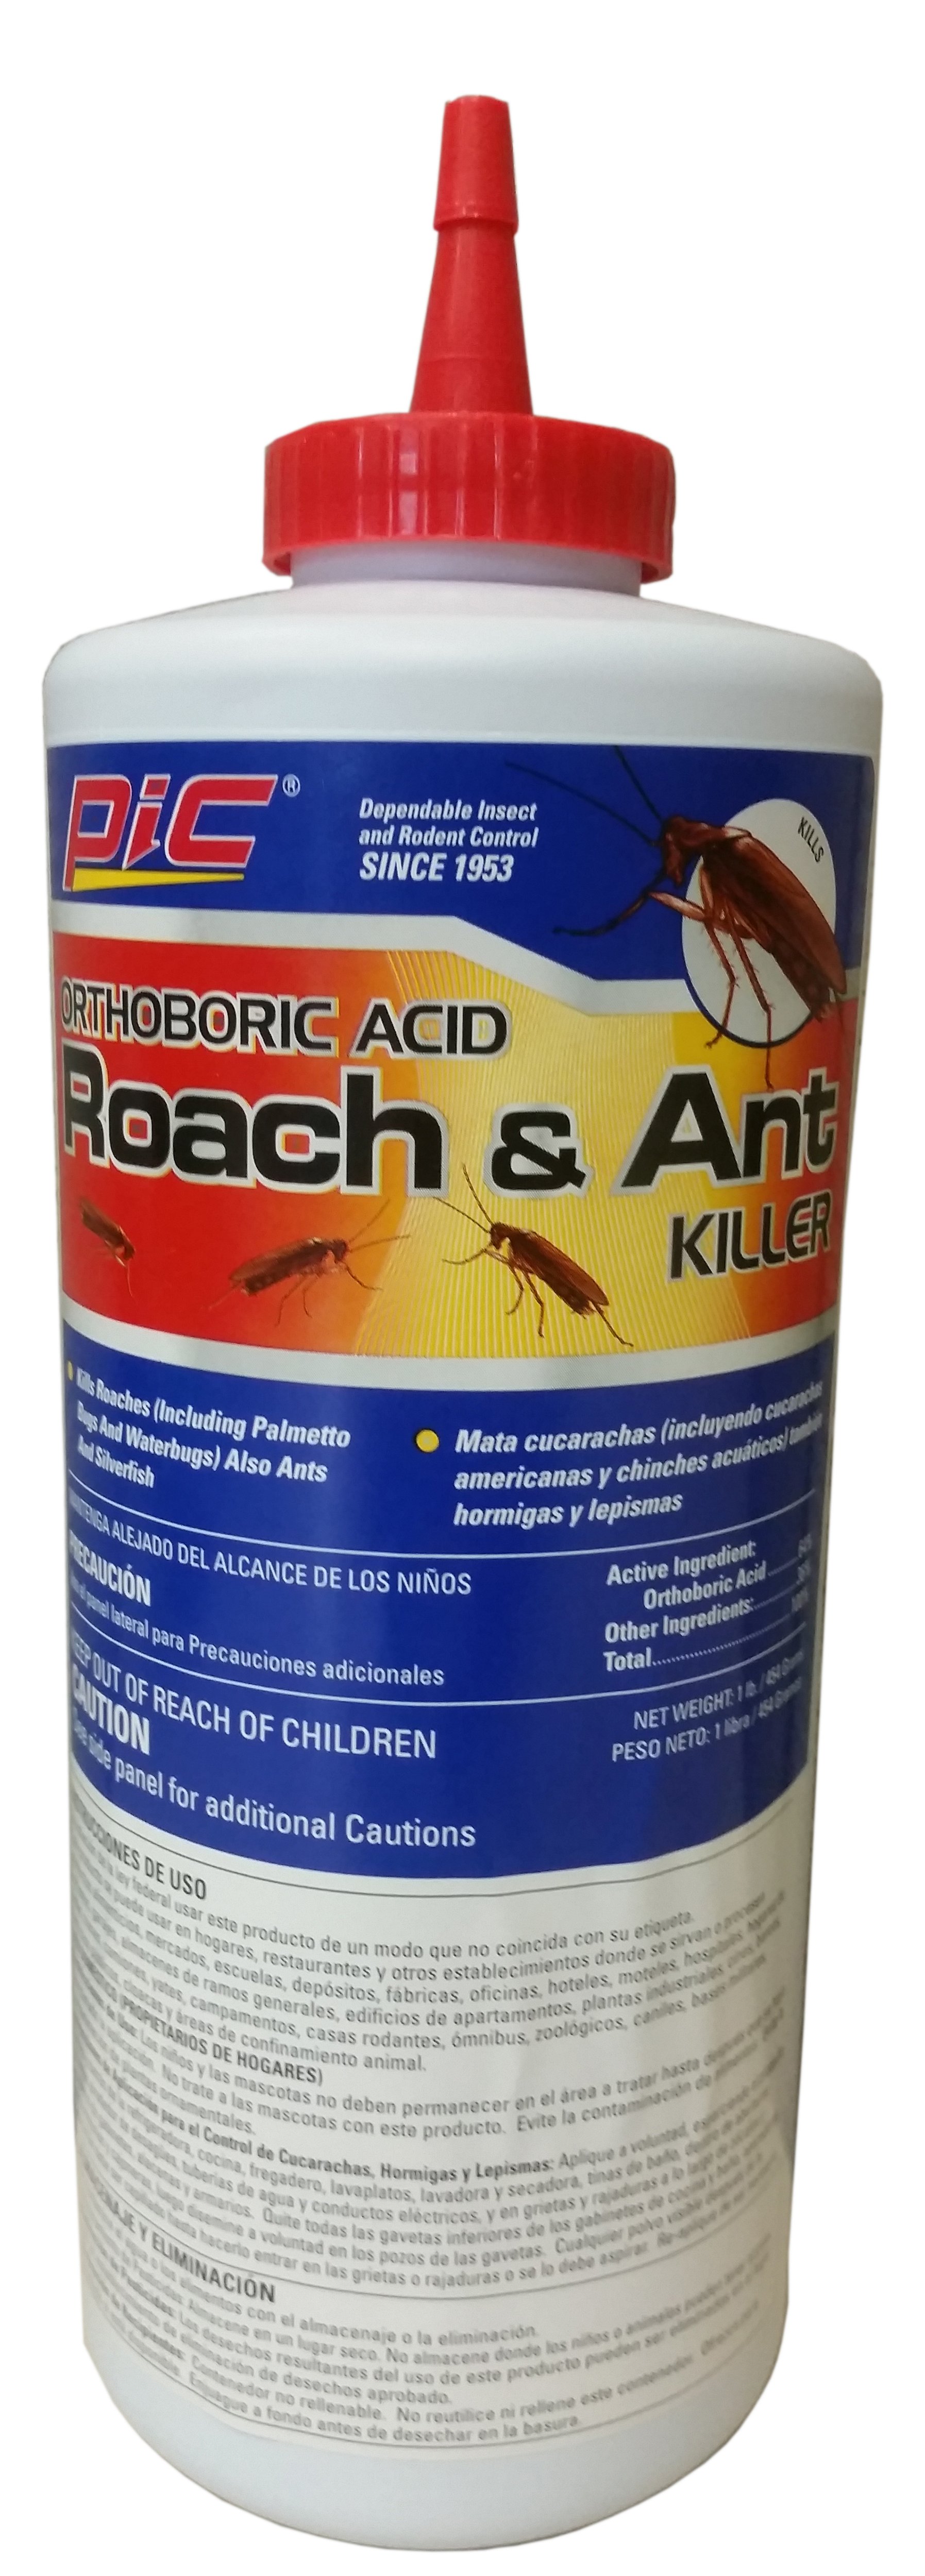 is boric acid safe for pets and humans